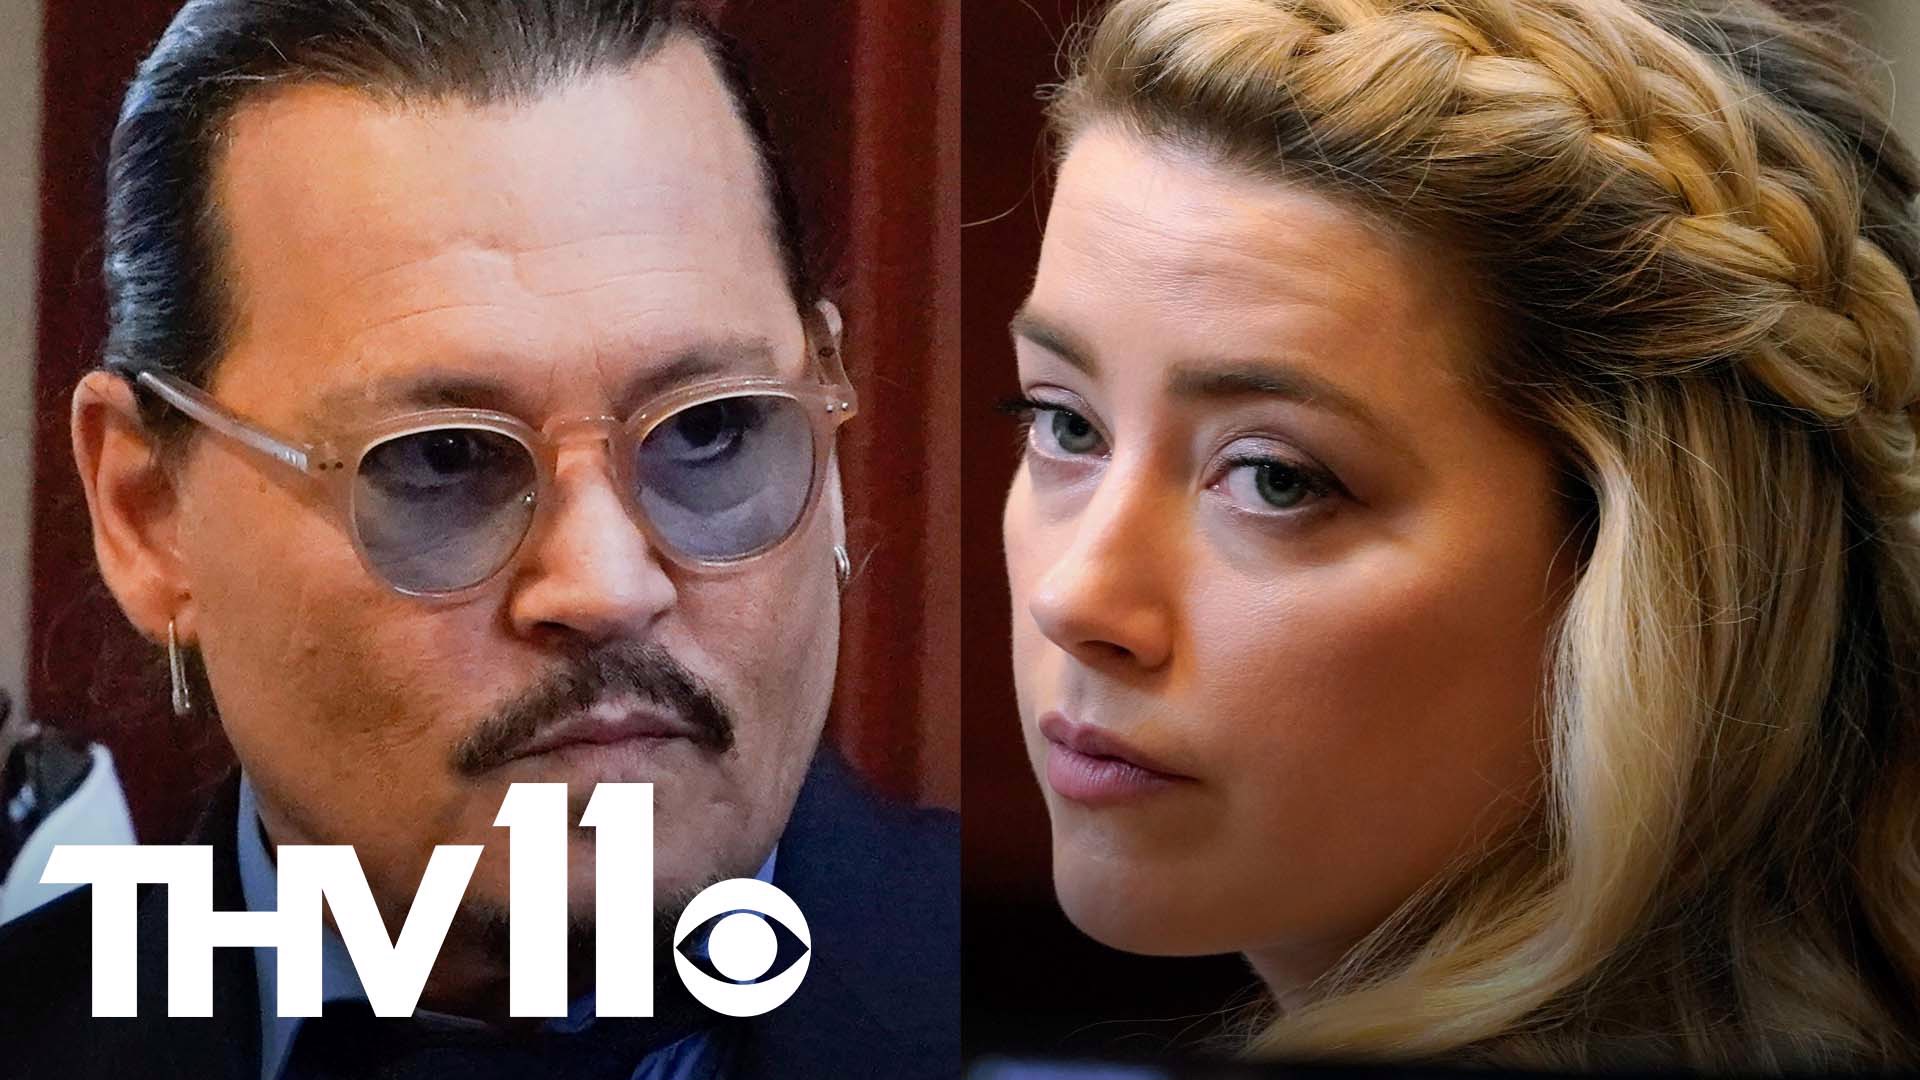 A jury on Wednesday ruled largely in favor of Johnny Depp in his libel lawsuit against ex-wife Amber Heard.